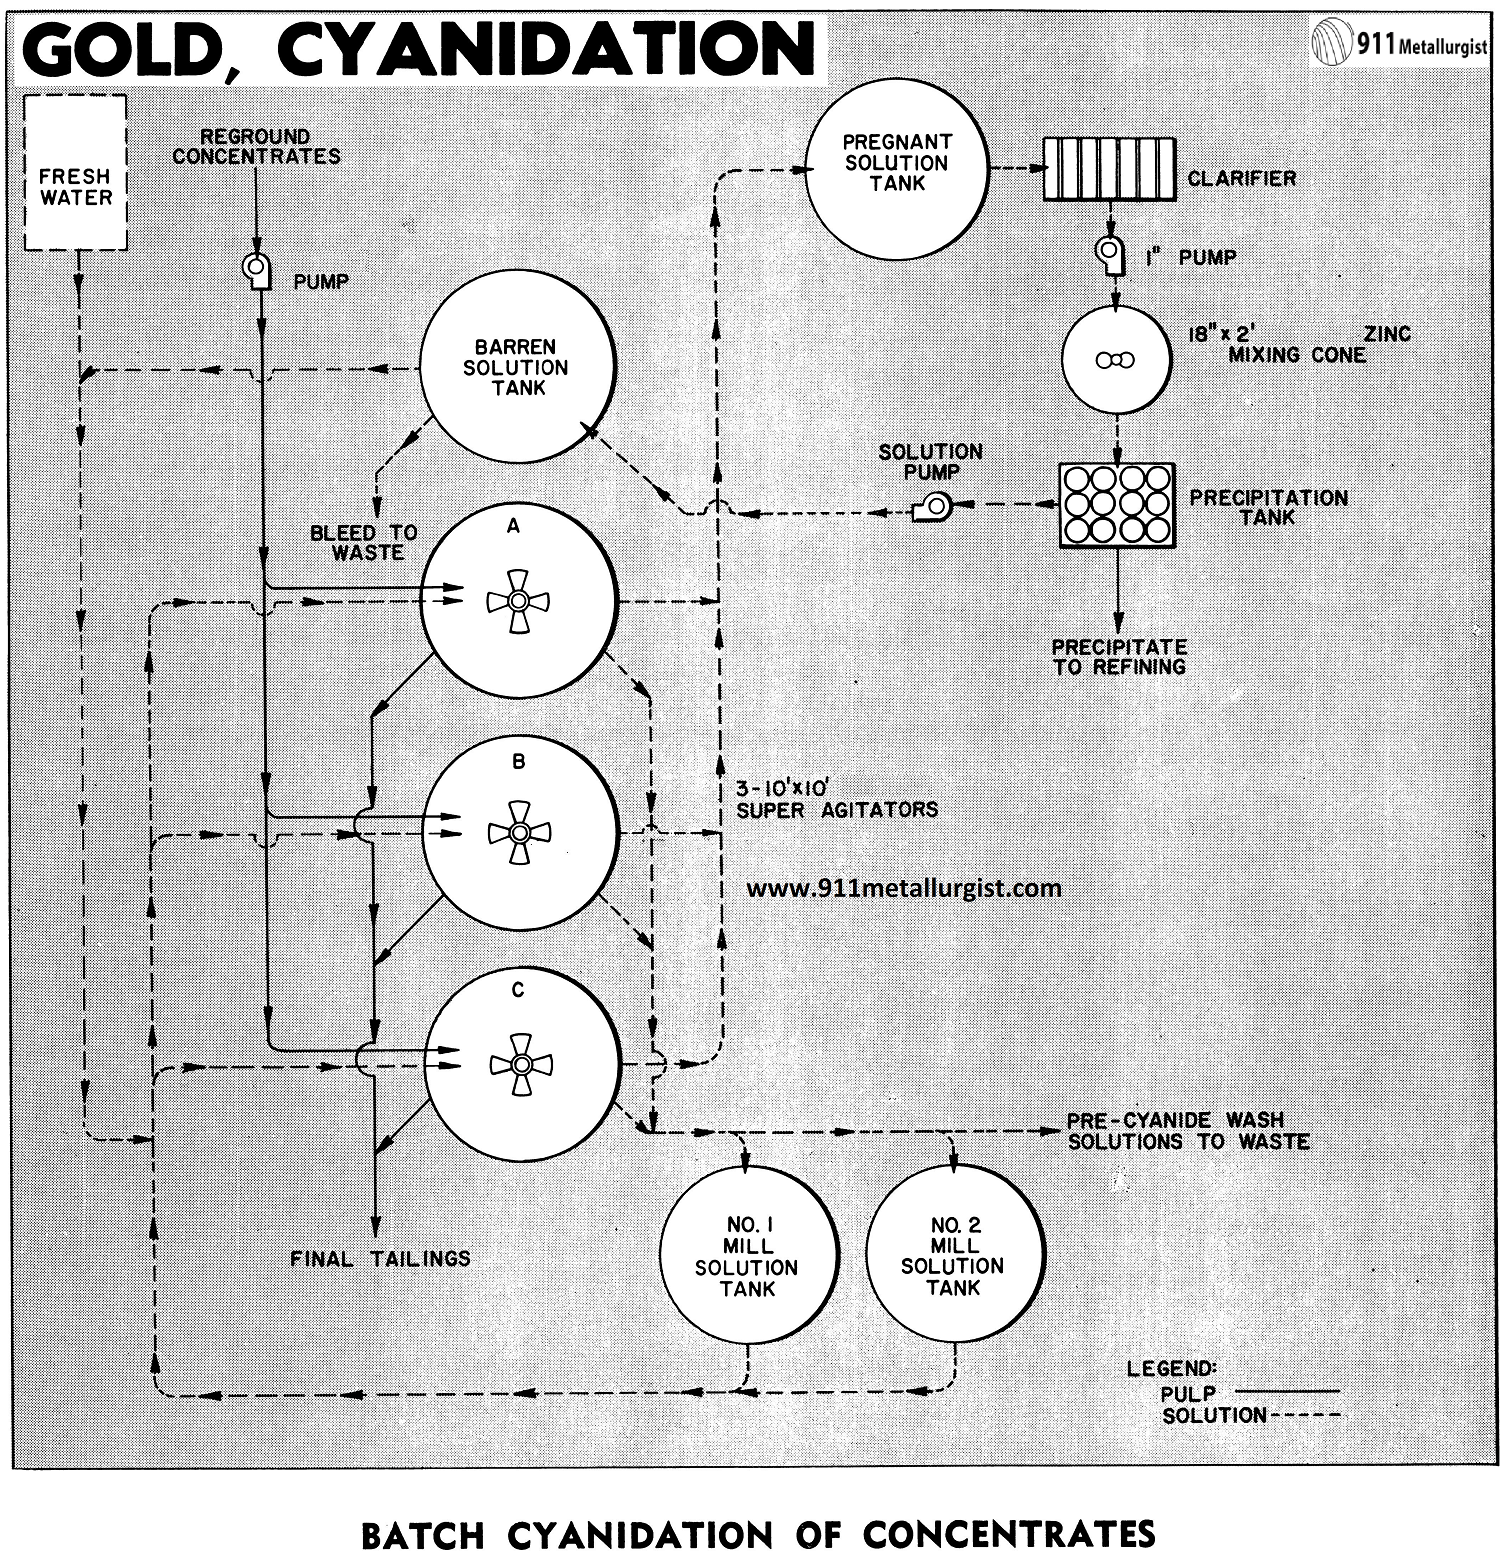 Batch Cyanidation of Concentrates